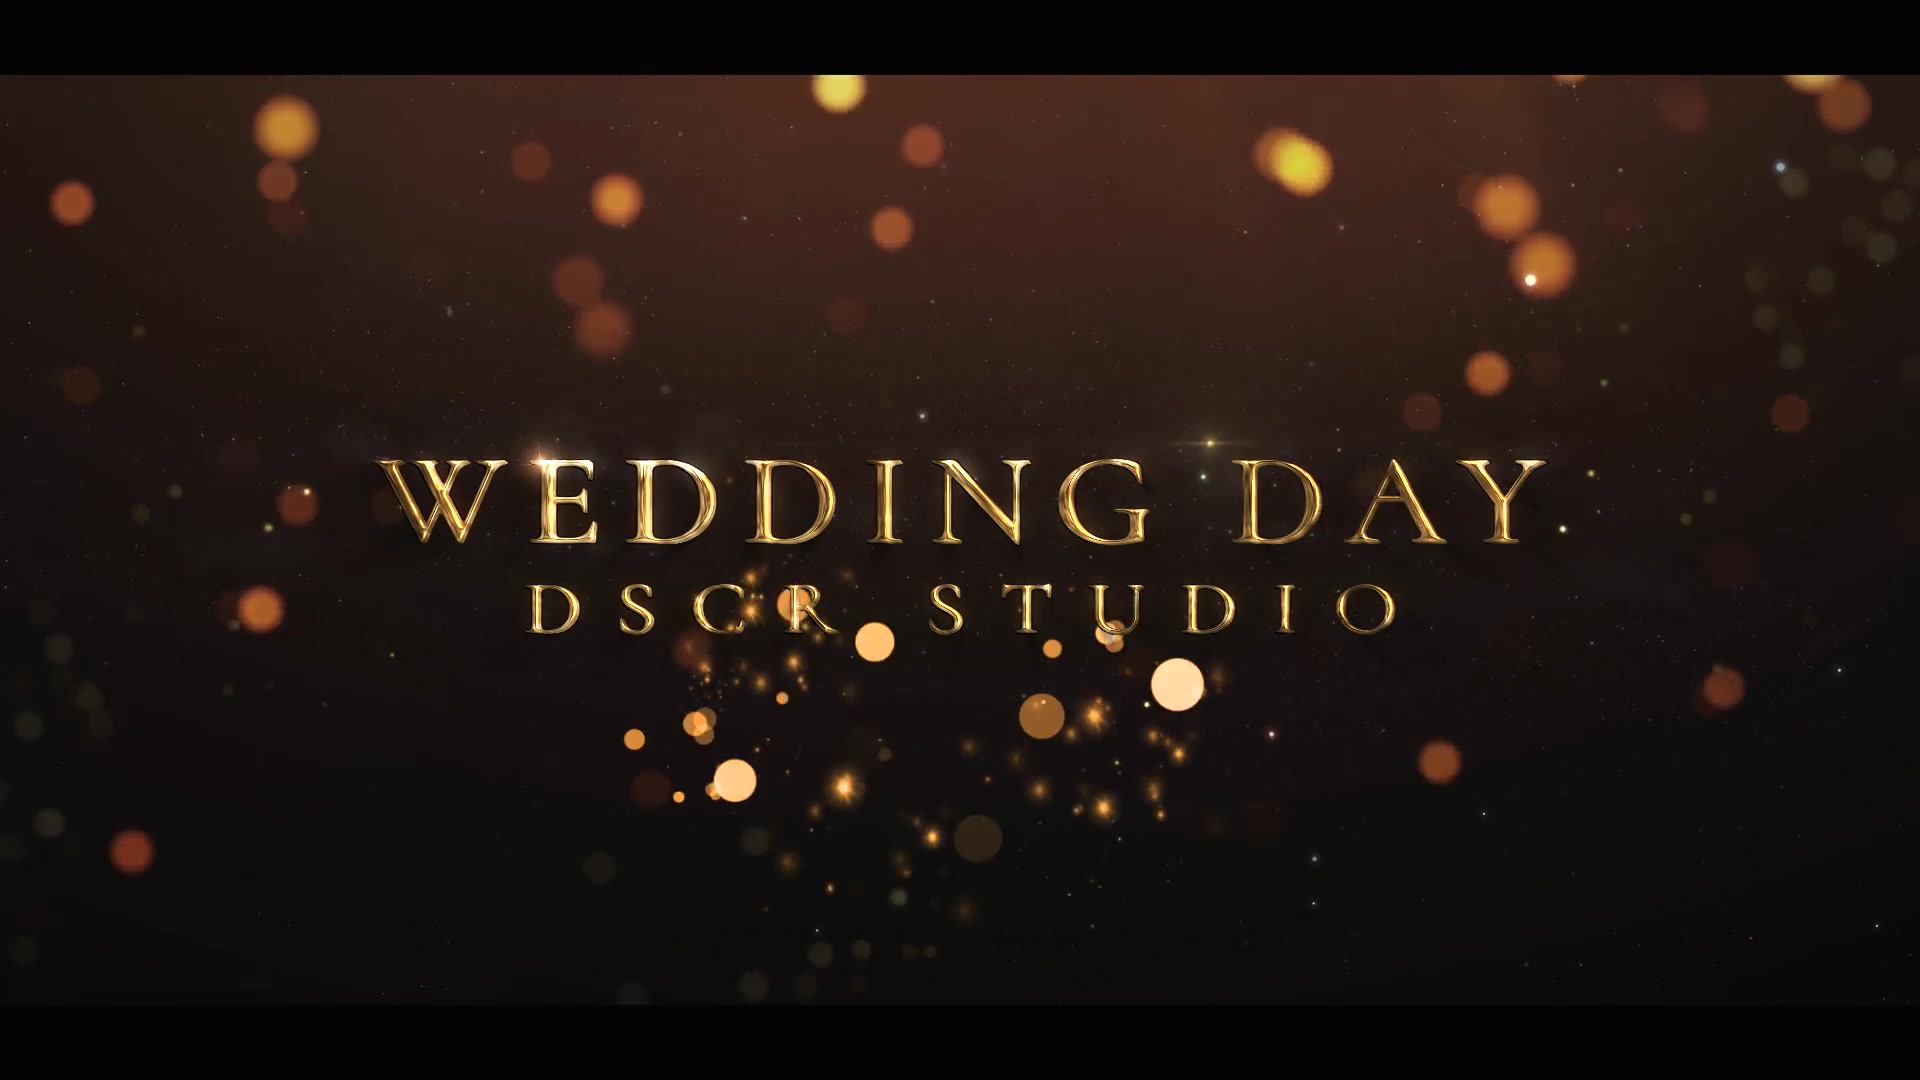 wedding intro after effects project free download